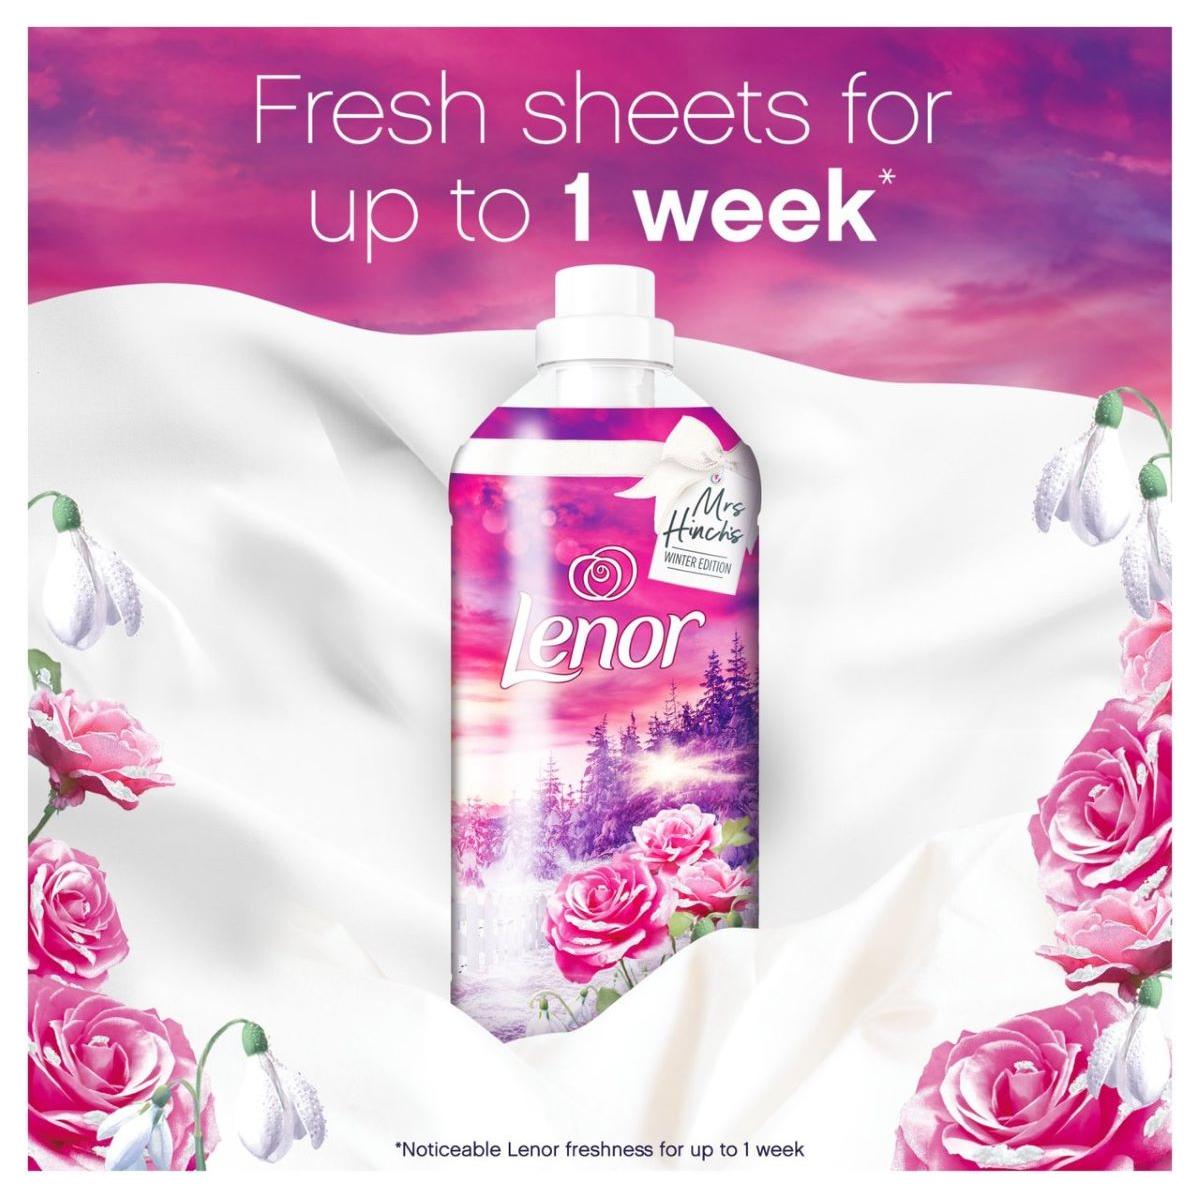 Lenor Fabric Conditioner, 50w, Pack of 2: Pink Tulips & White Jasmine + Frosted Rose Wonderland